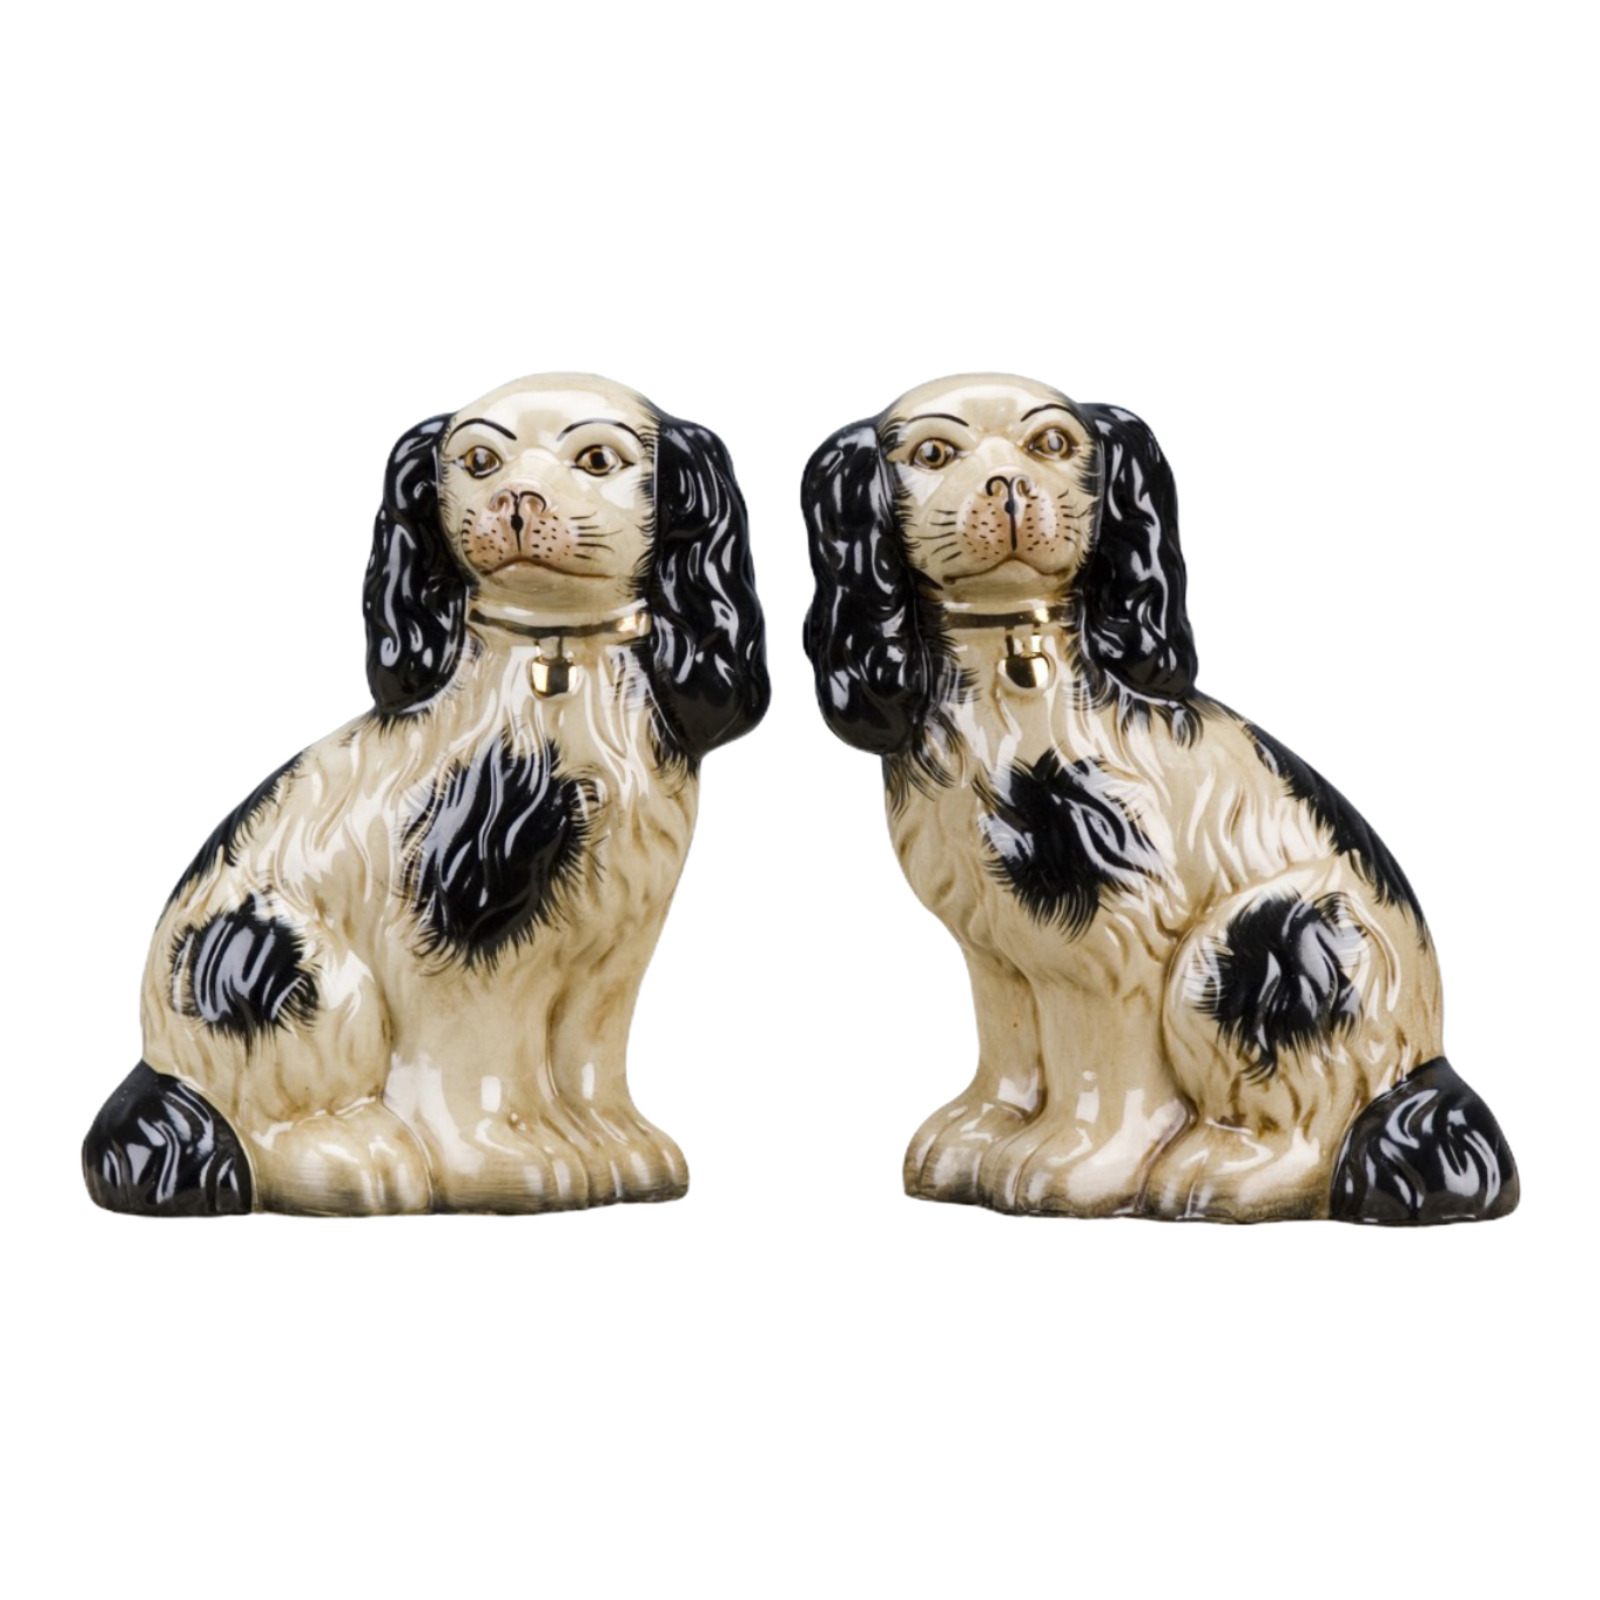 New Reproduction Staffordshire King Charles Spaniel Dog Pair Figurines 9 Inches